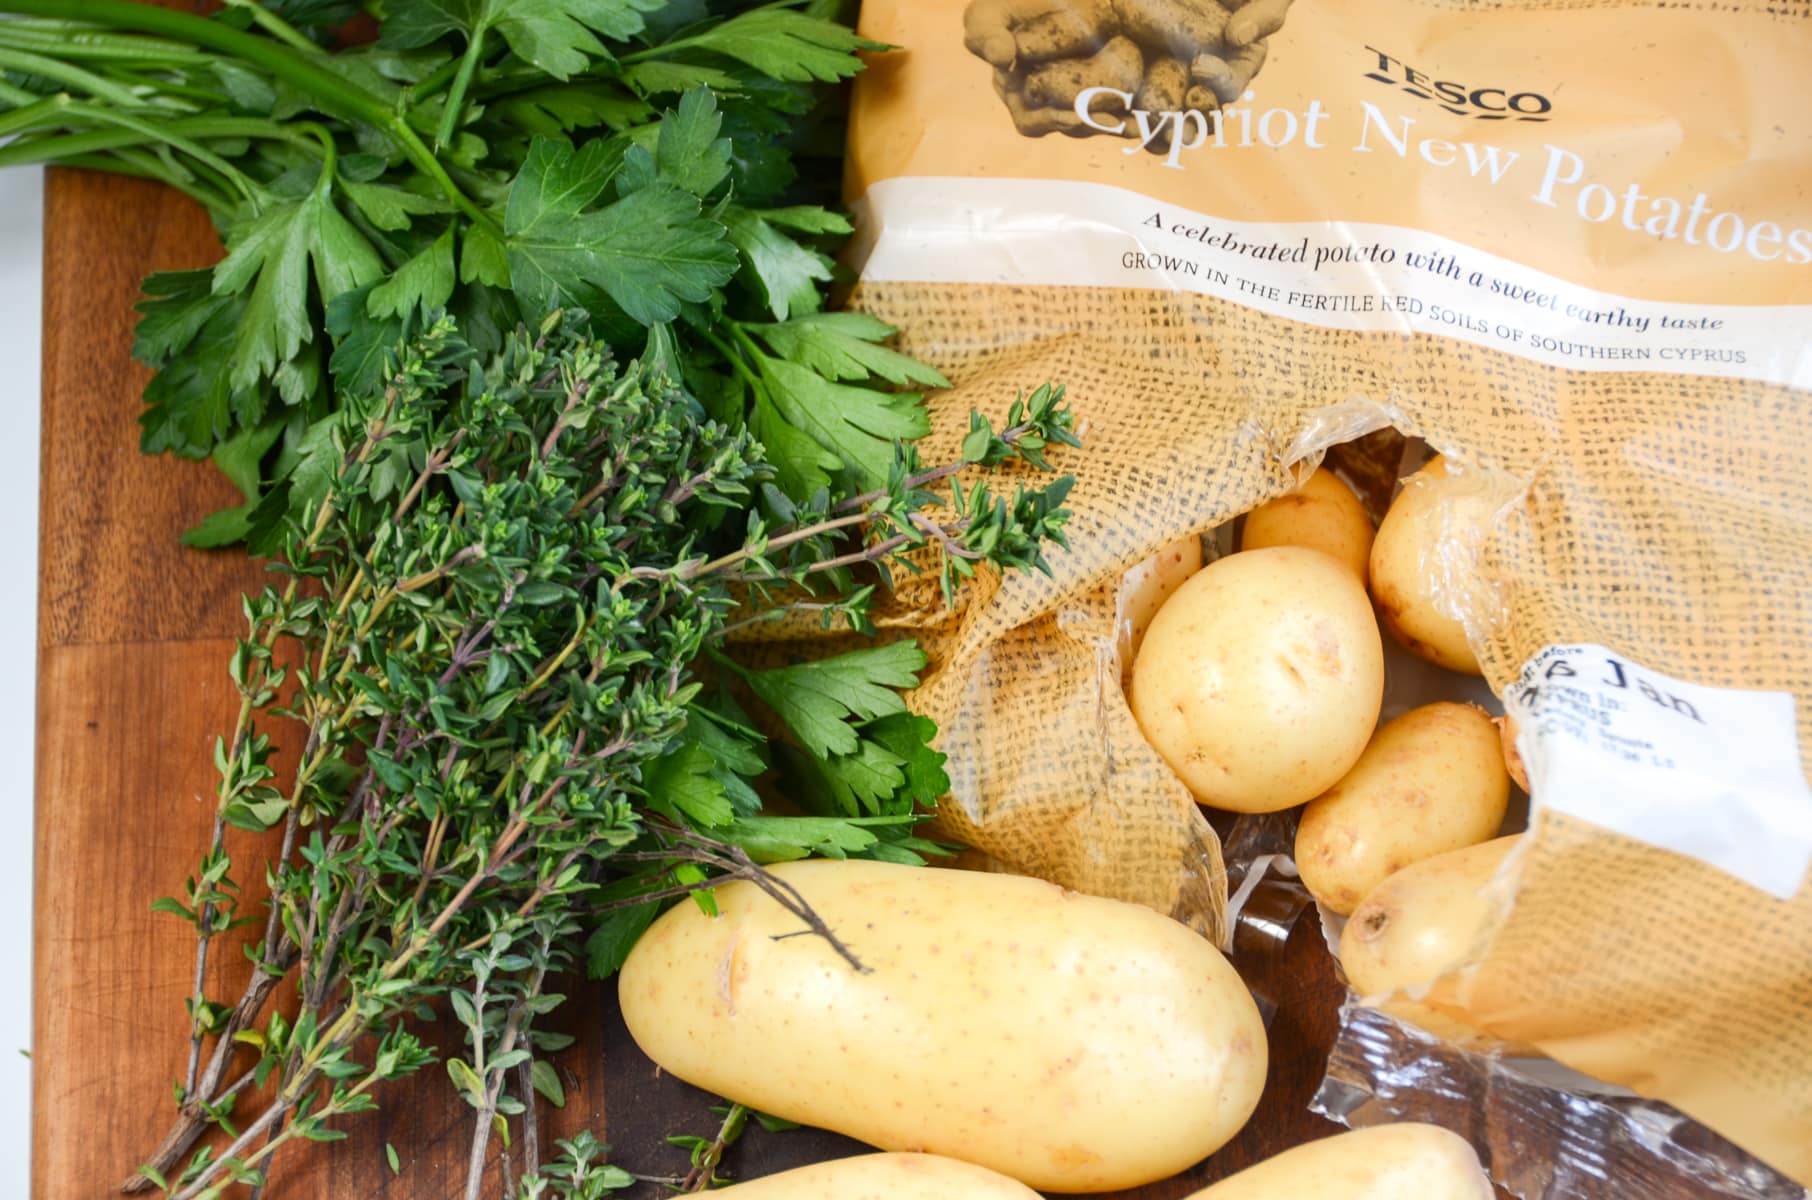 Fresh herbs including thyme and parsley with an open bag of Cypriot Potatoes.